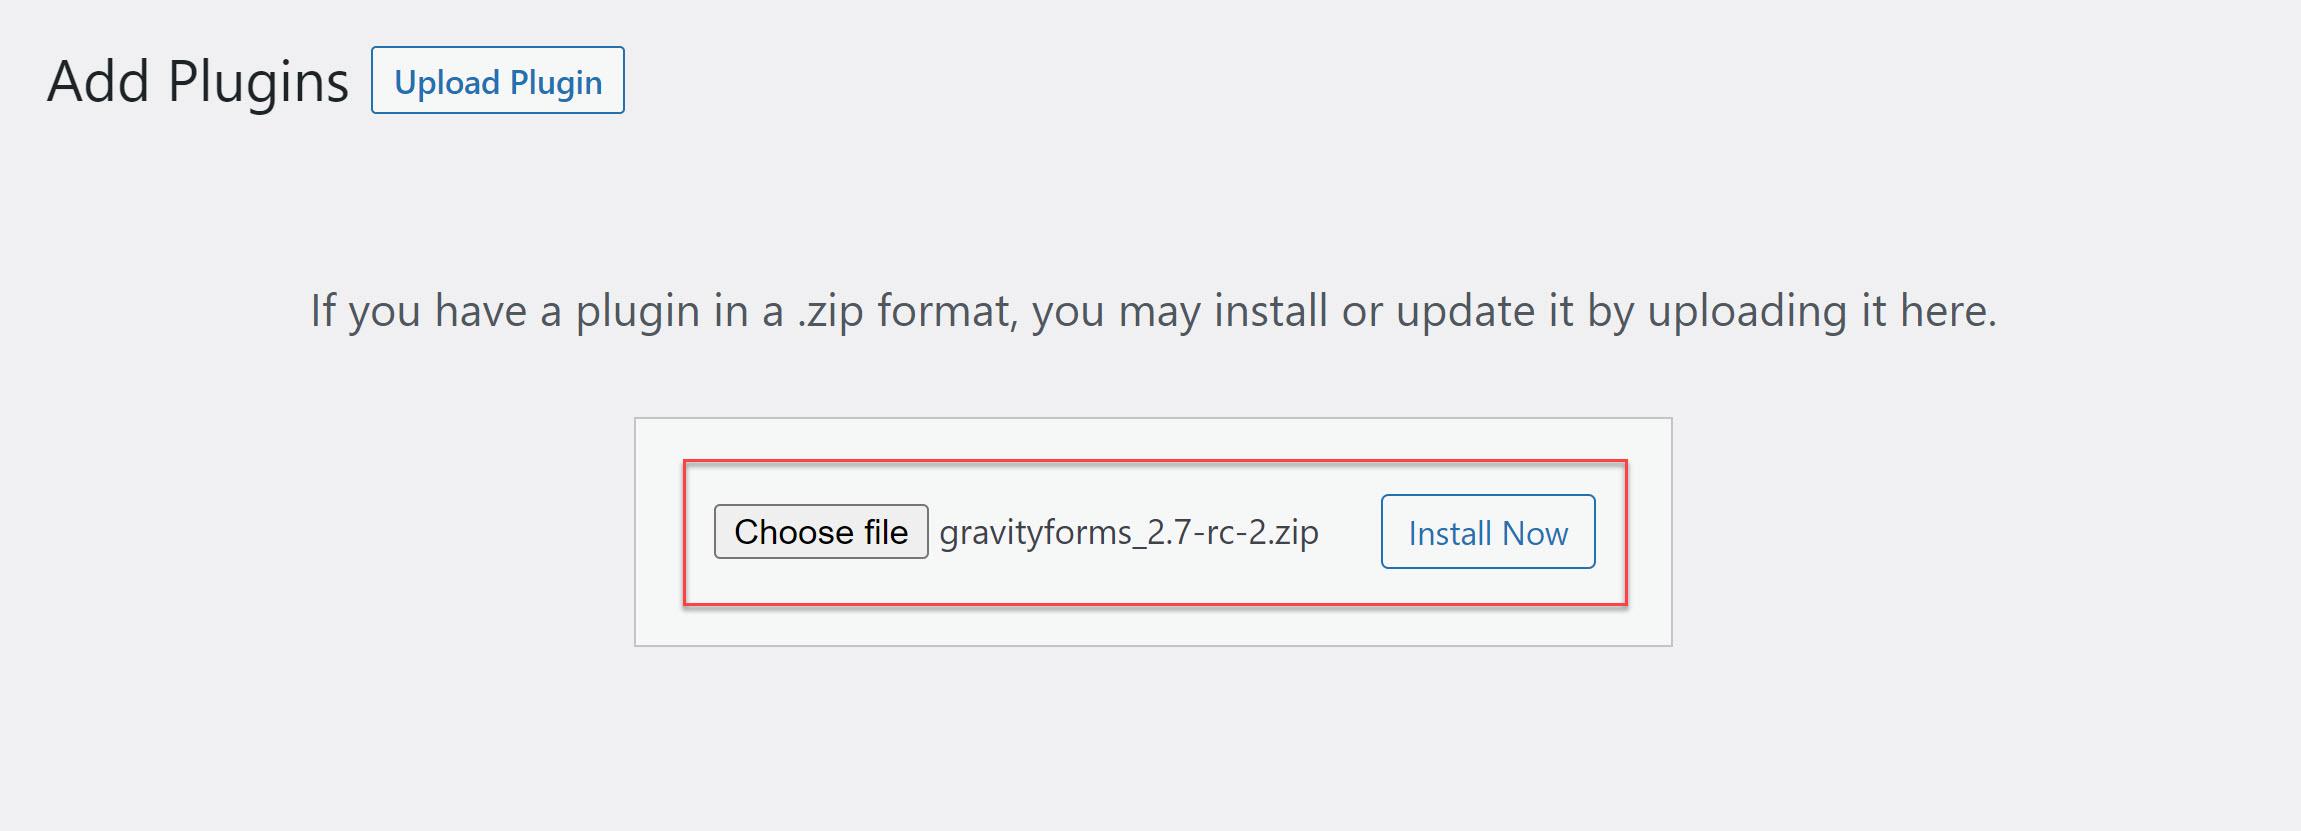 Upload Gravity Forms 2.7 RC 2